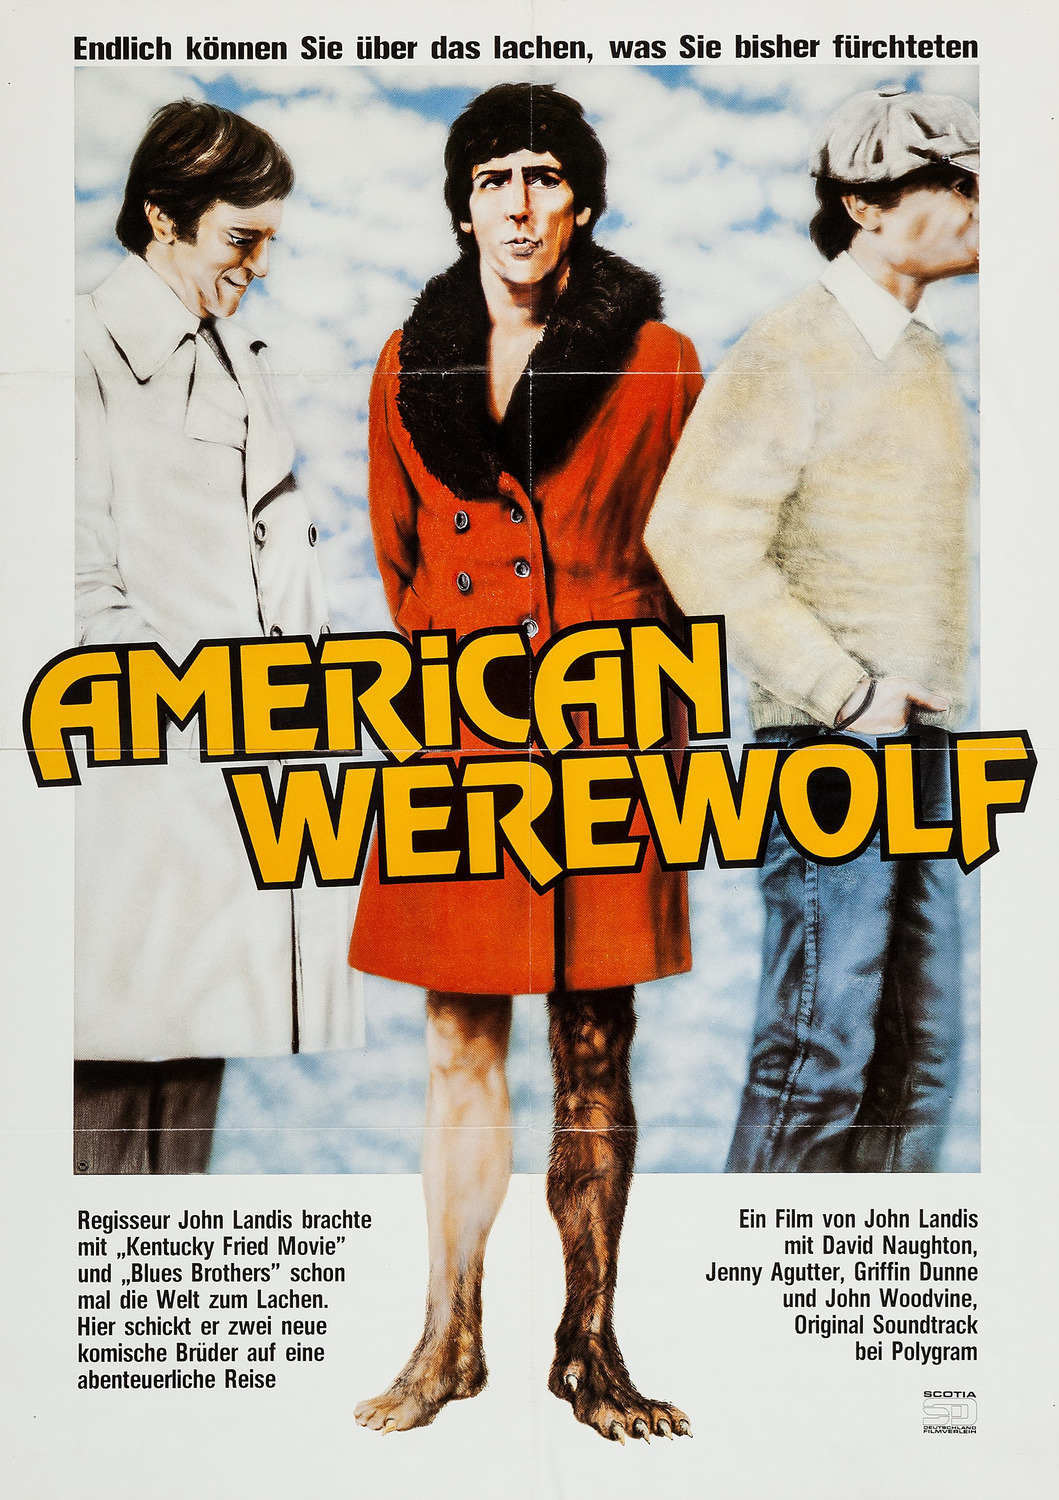 Extra Large Movie Poster Image for An American Werewolf in London (#10 of 10)